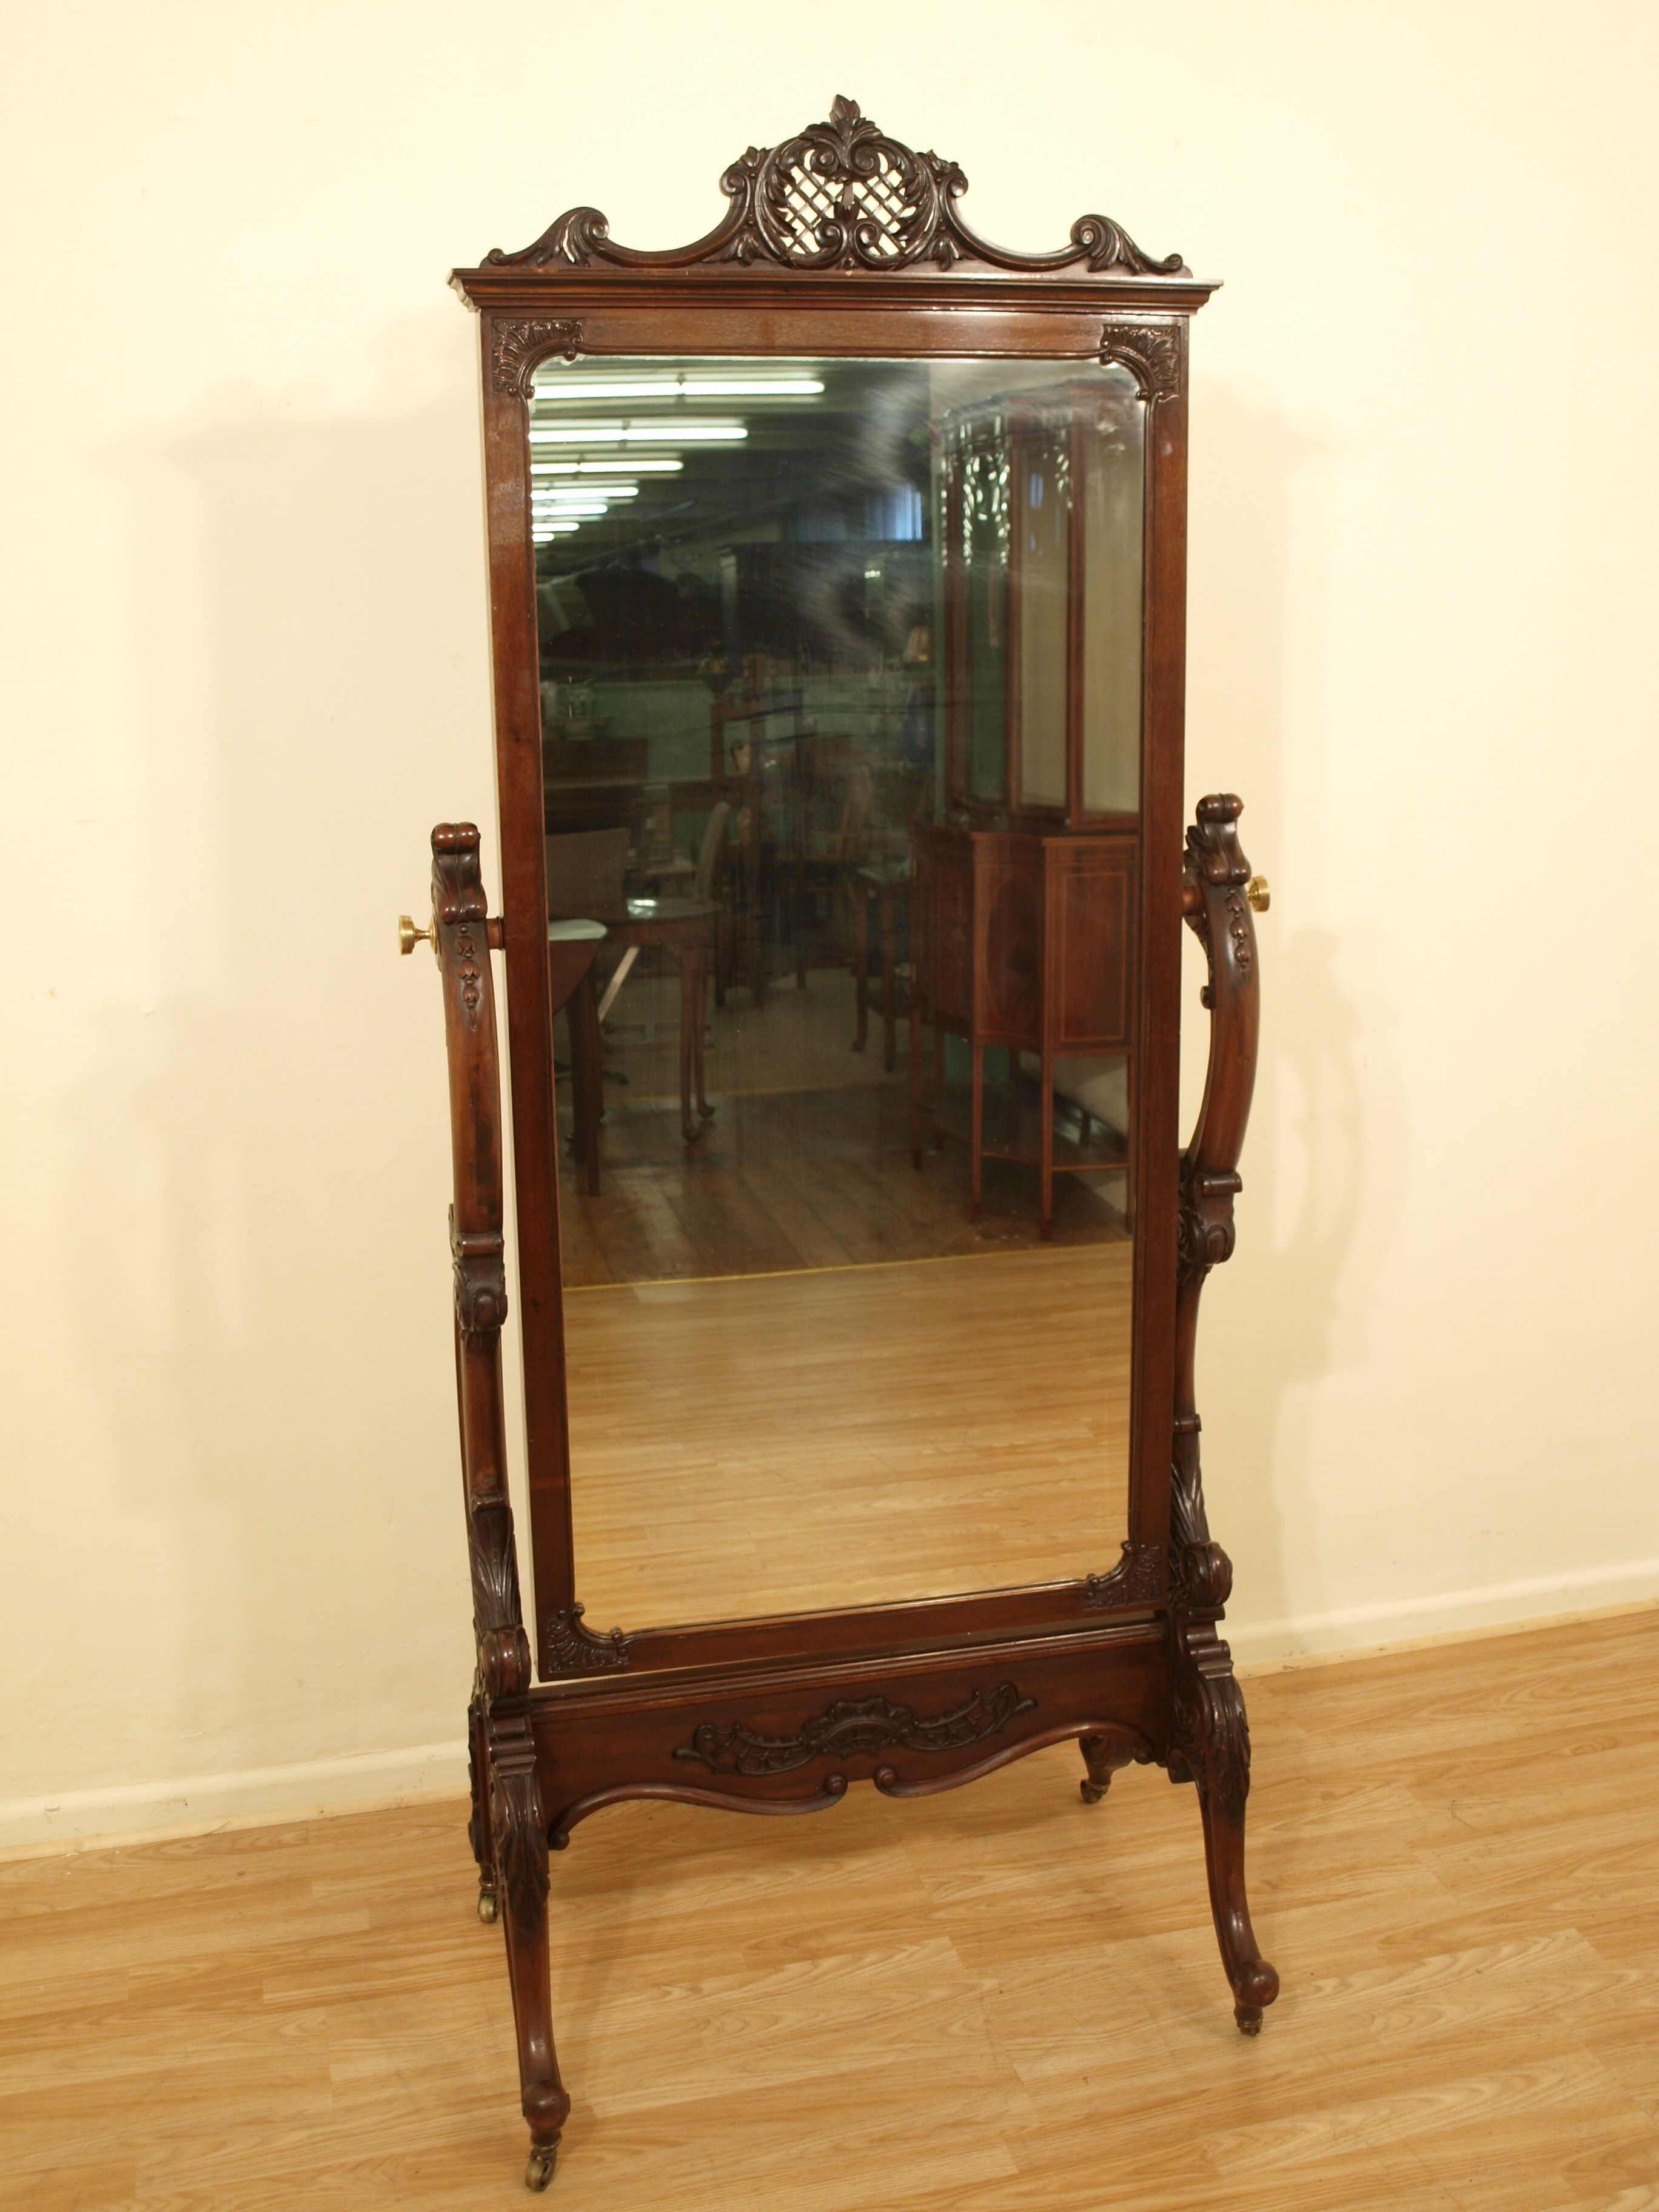 Chavel Mirror Cheval Mirror Pinterest Cheval Mirror For Vintage Standing Mirror Full Length (View 2 of 15)